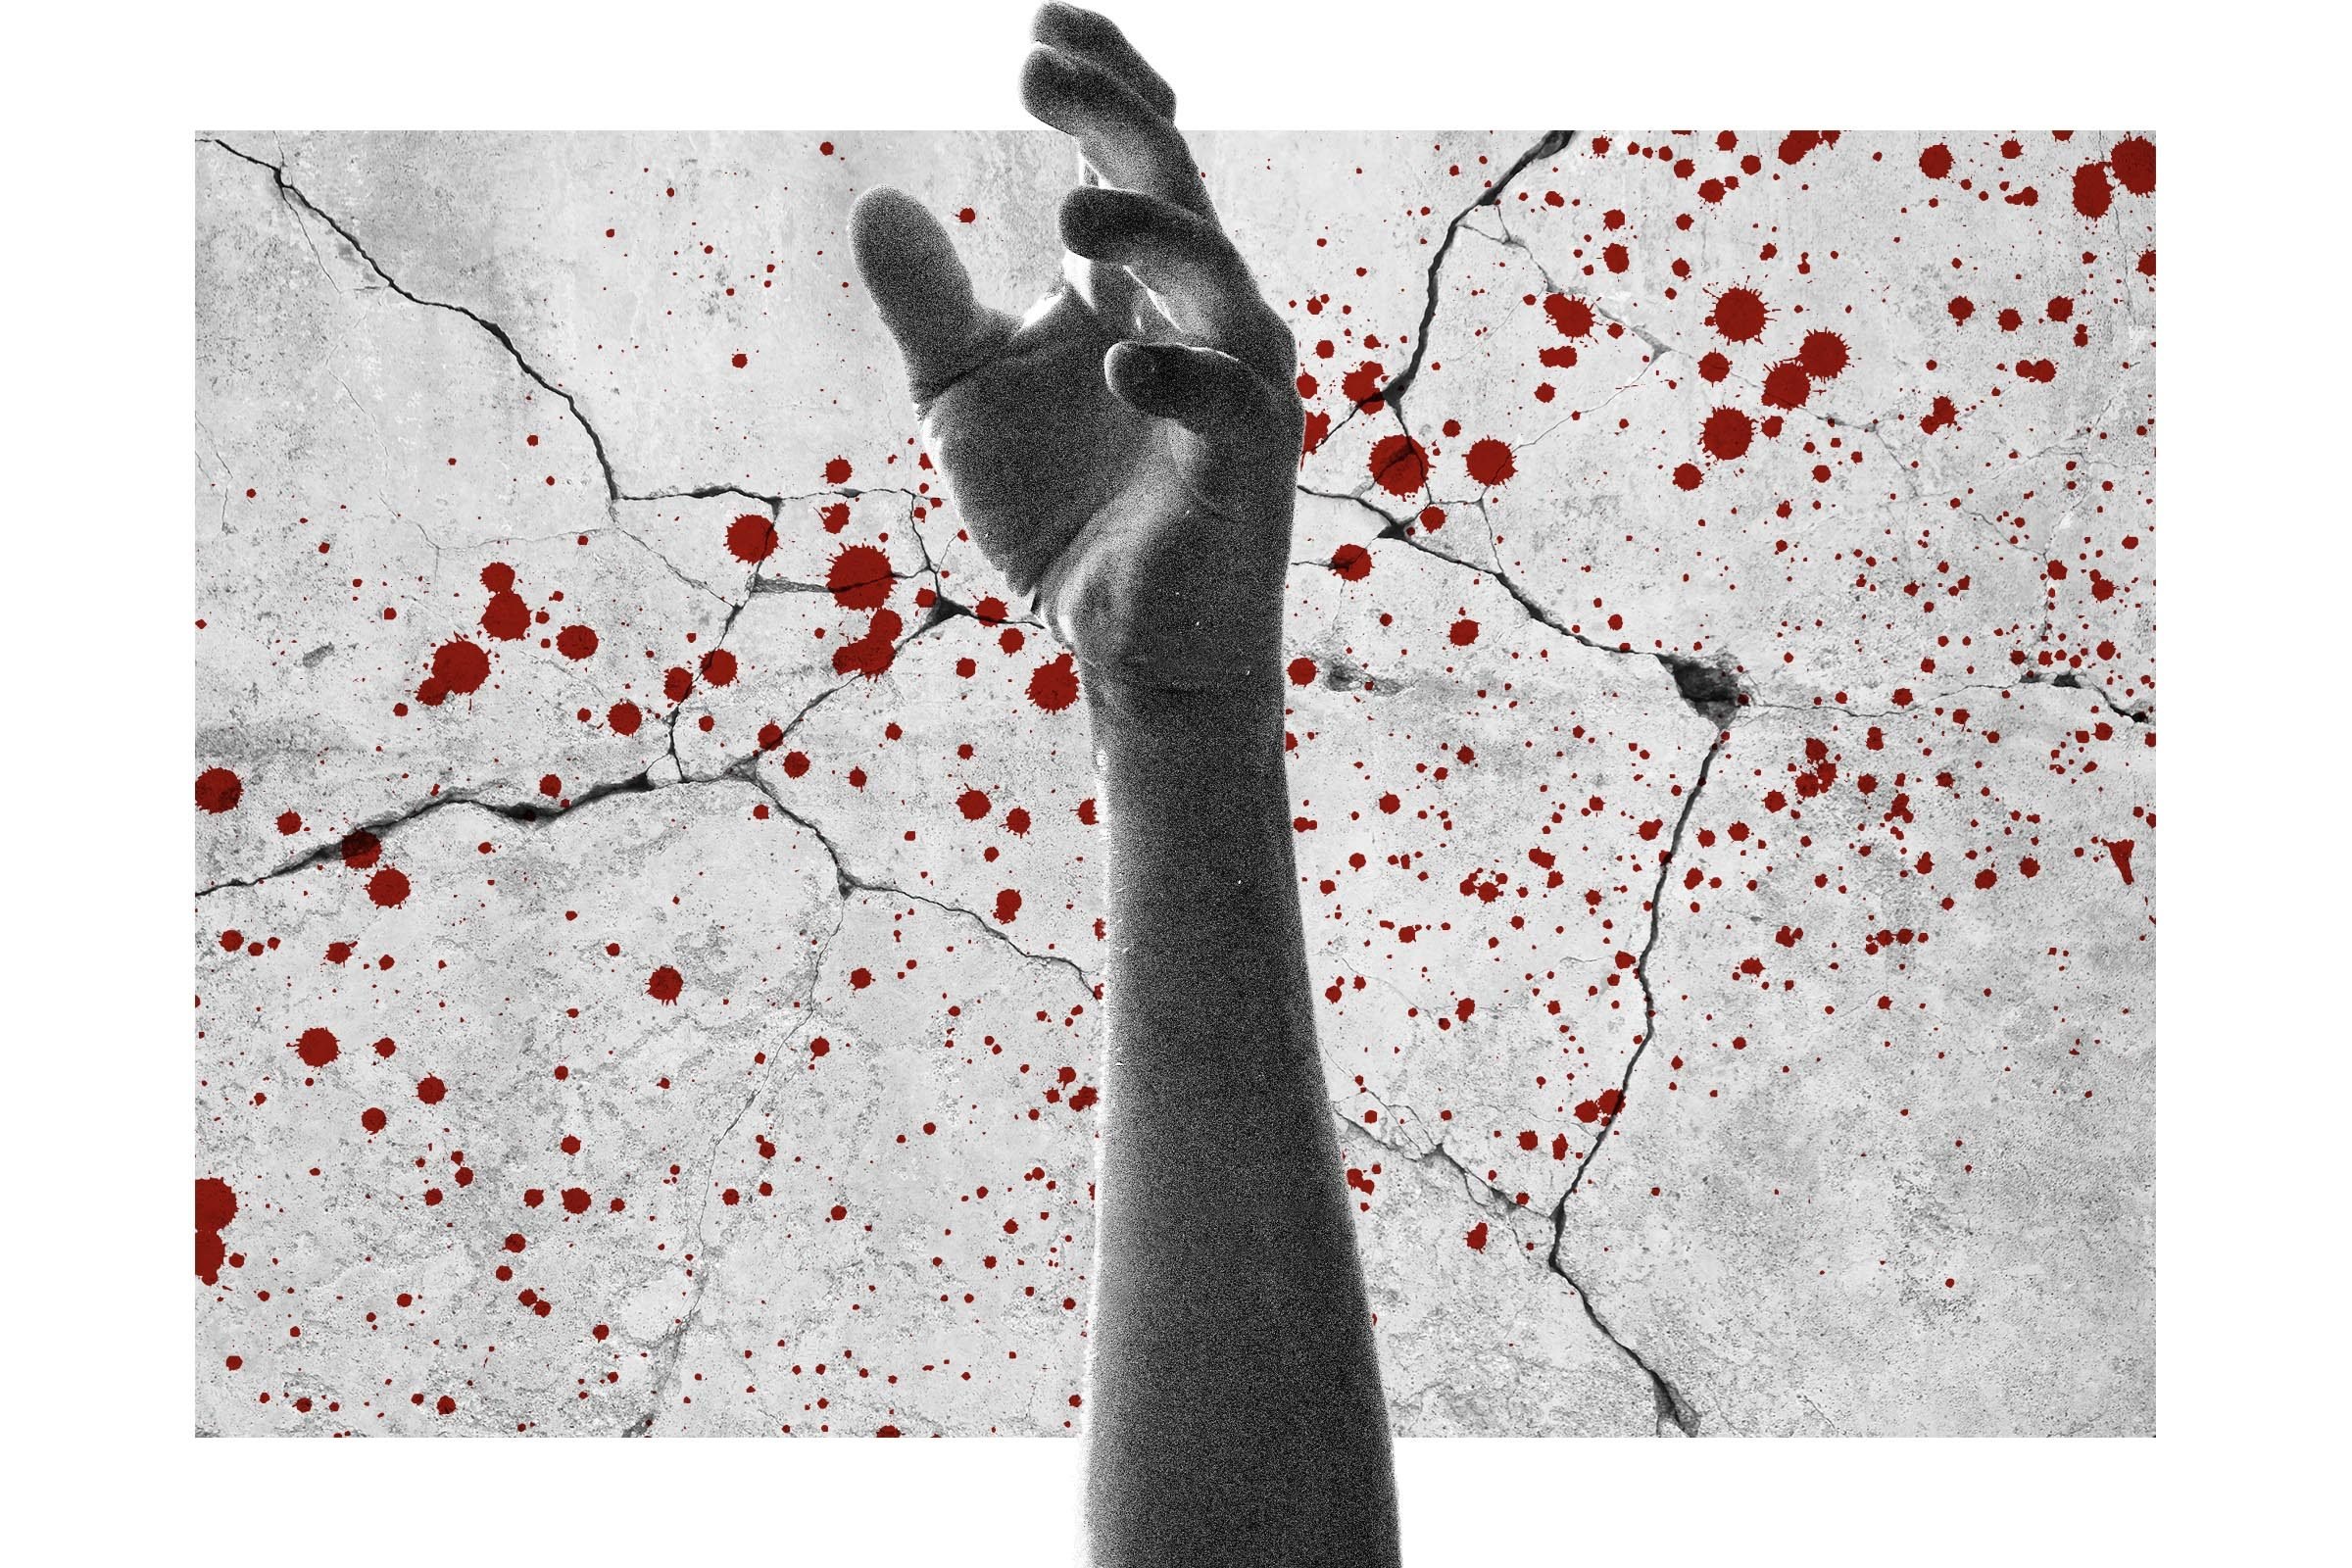 Collage of a hand reaching on a background of blood splatters